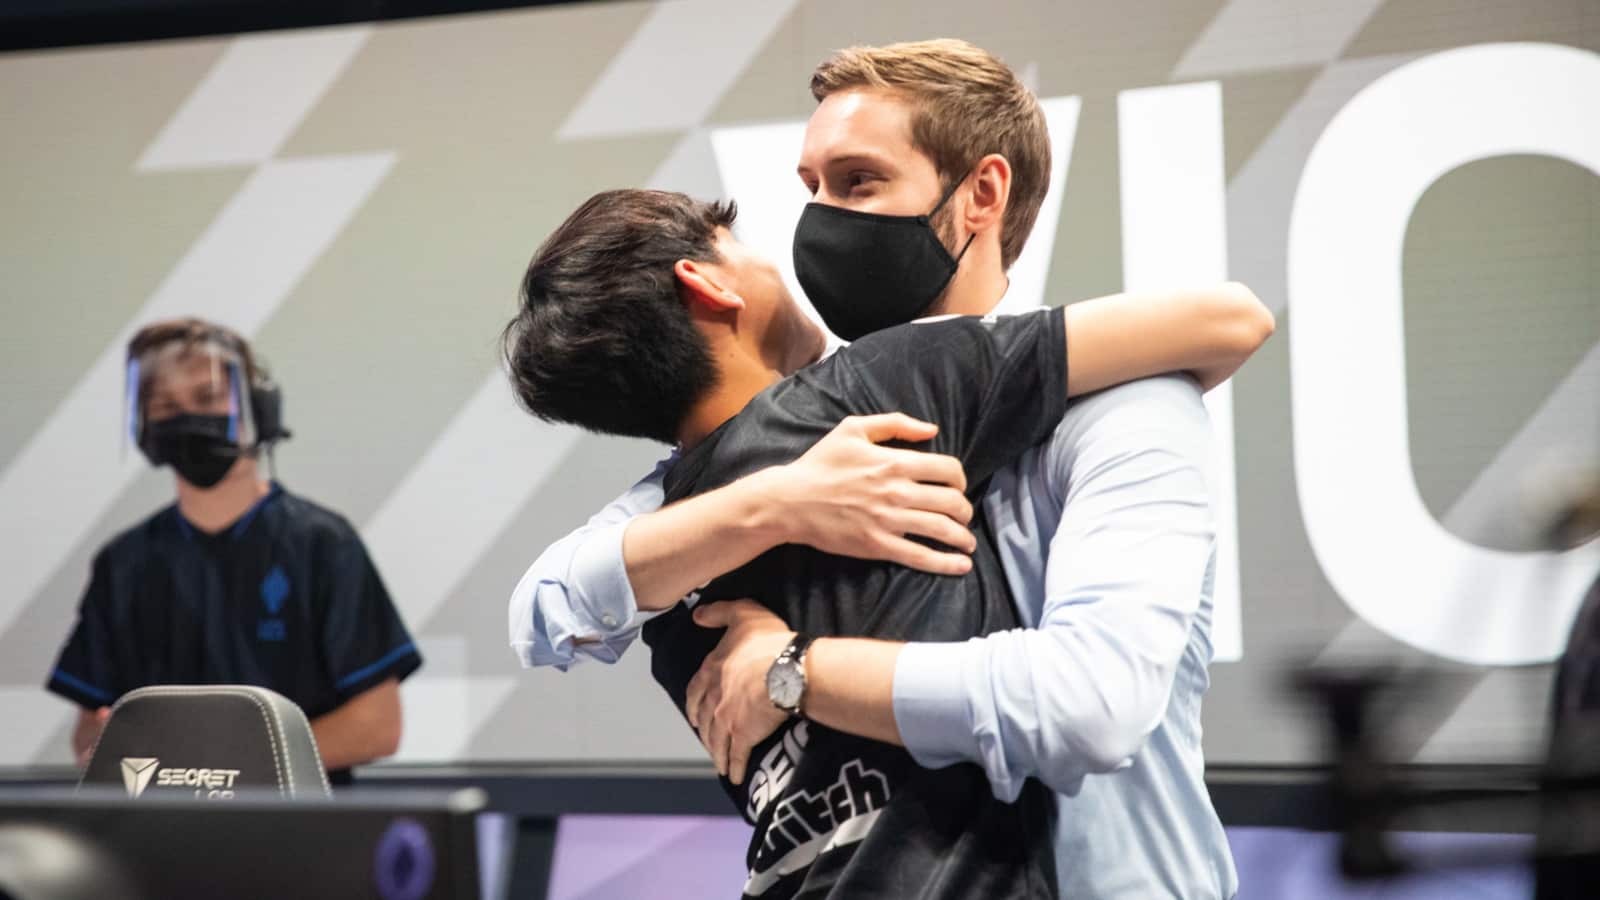 Bjergsen and Lost embrace after TSM victory on LCS 2021 Summer stage in Week 1 against Team Liquid.